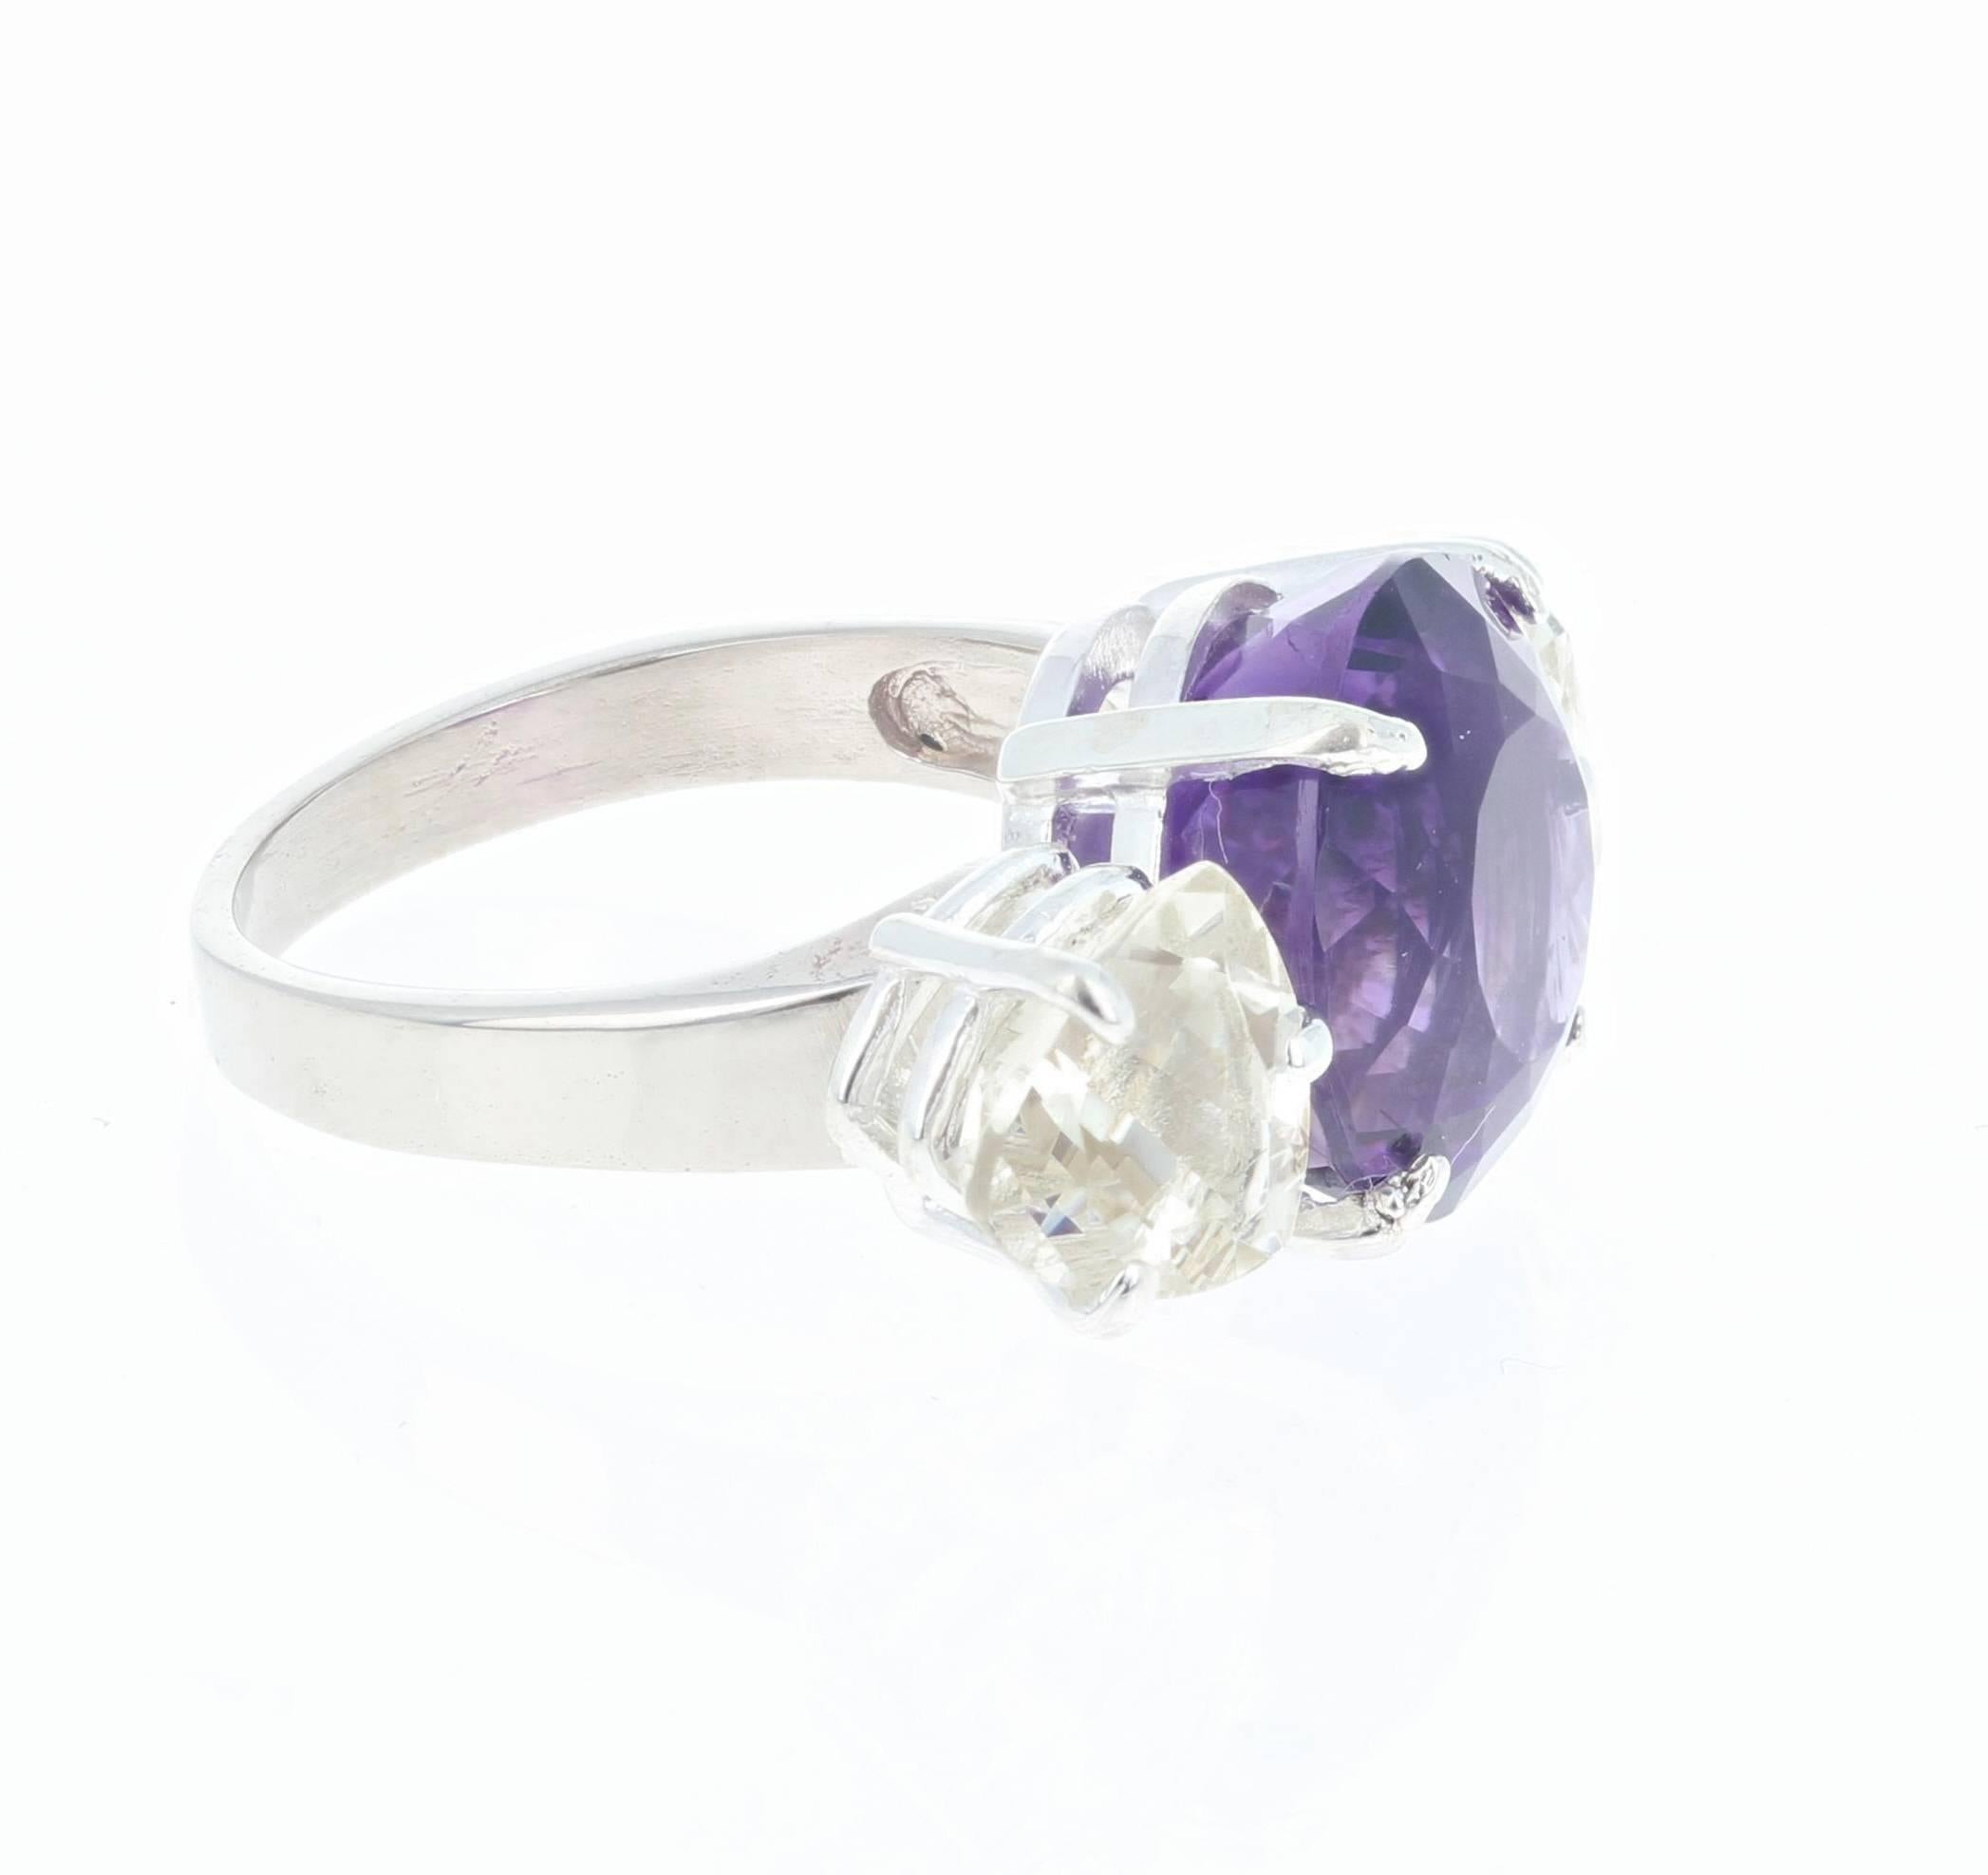 Sparkling African 9 carat round Amethyst (12.5 mm) enhanced with 6 carats of trillion cut Labradorite side stones set in a 6.75 size 14Kt white gold ring.